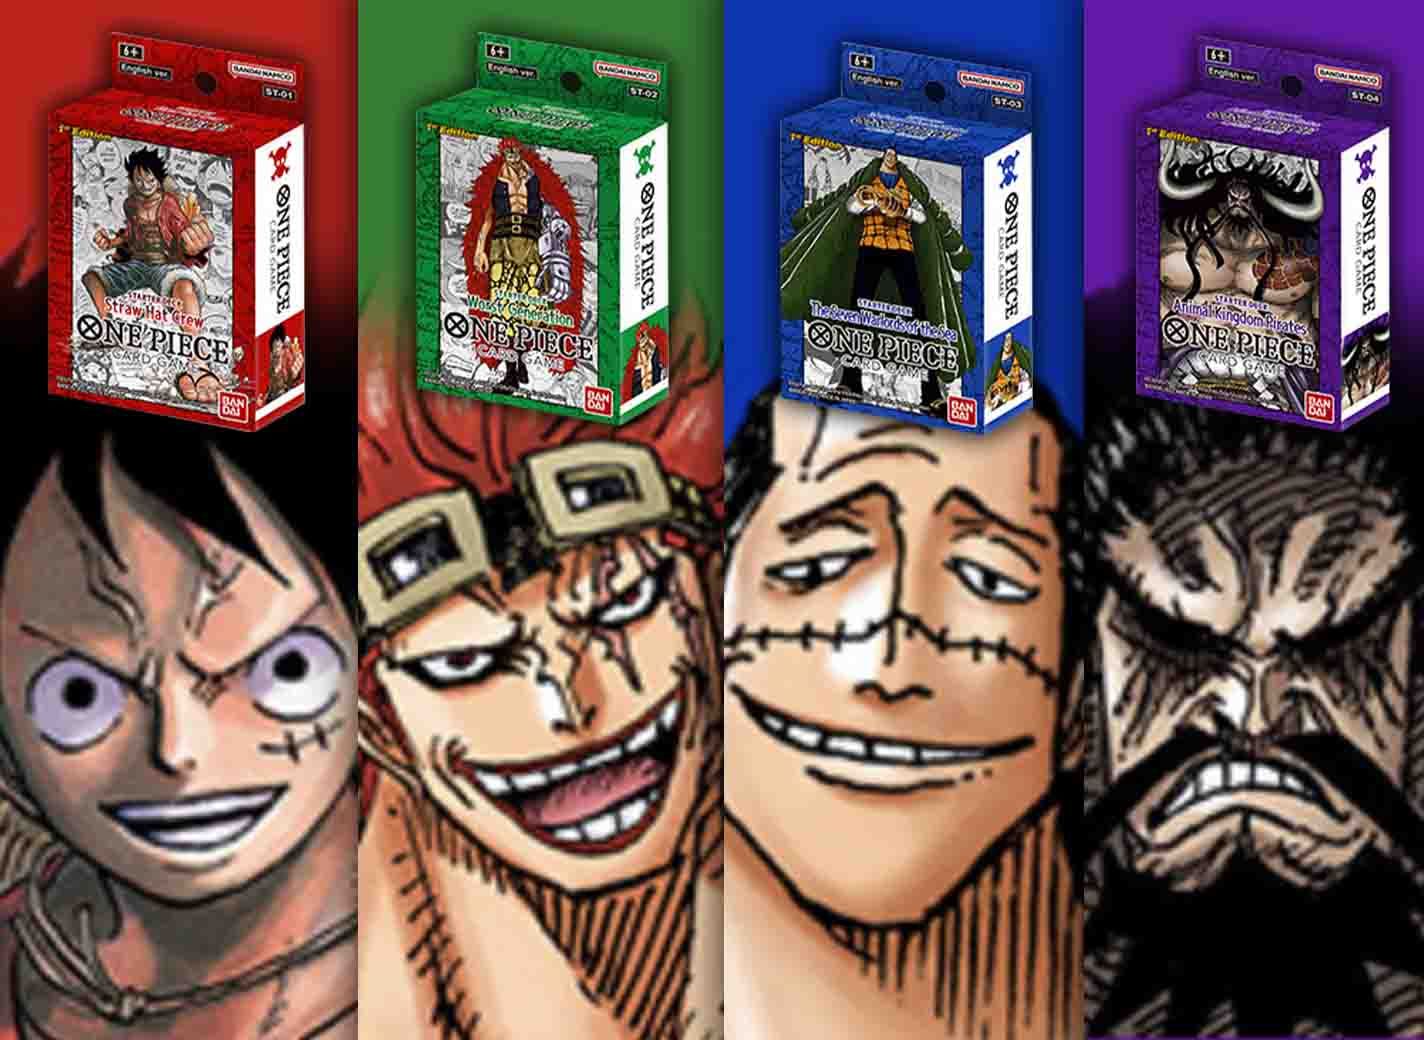 One Piece Card Game Deck Lists